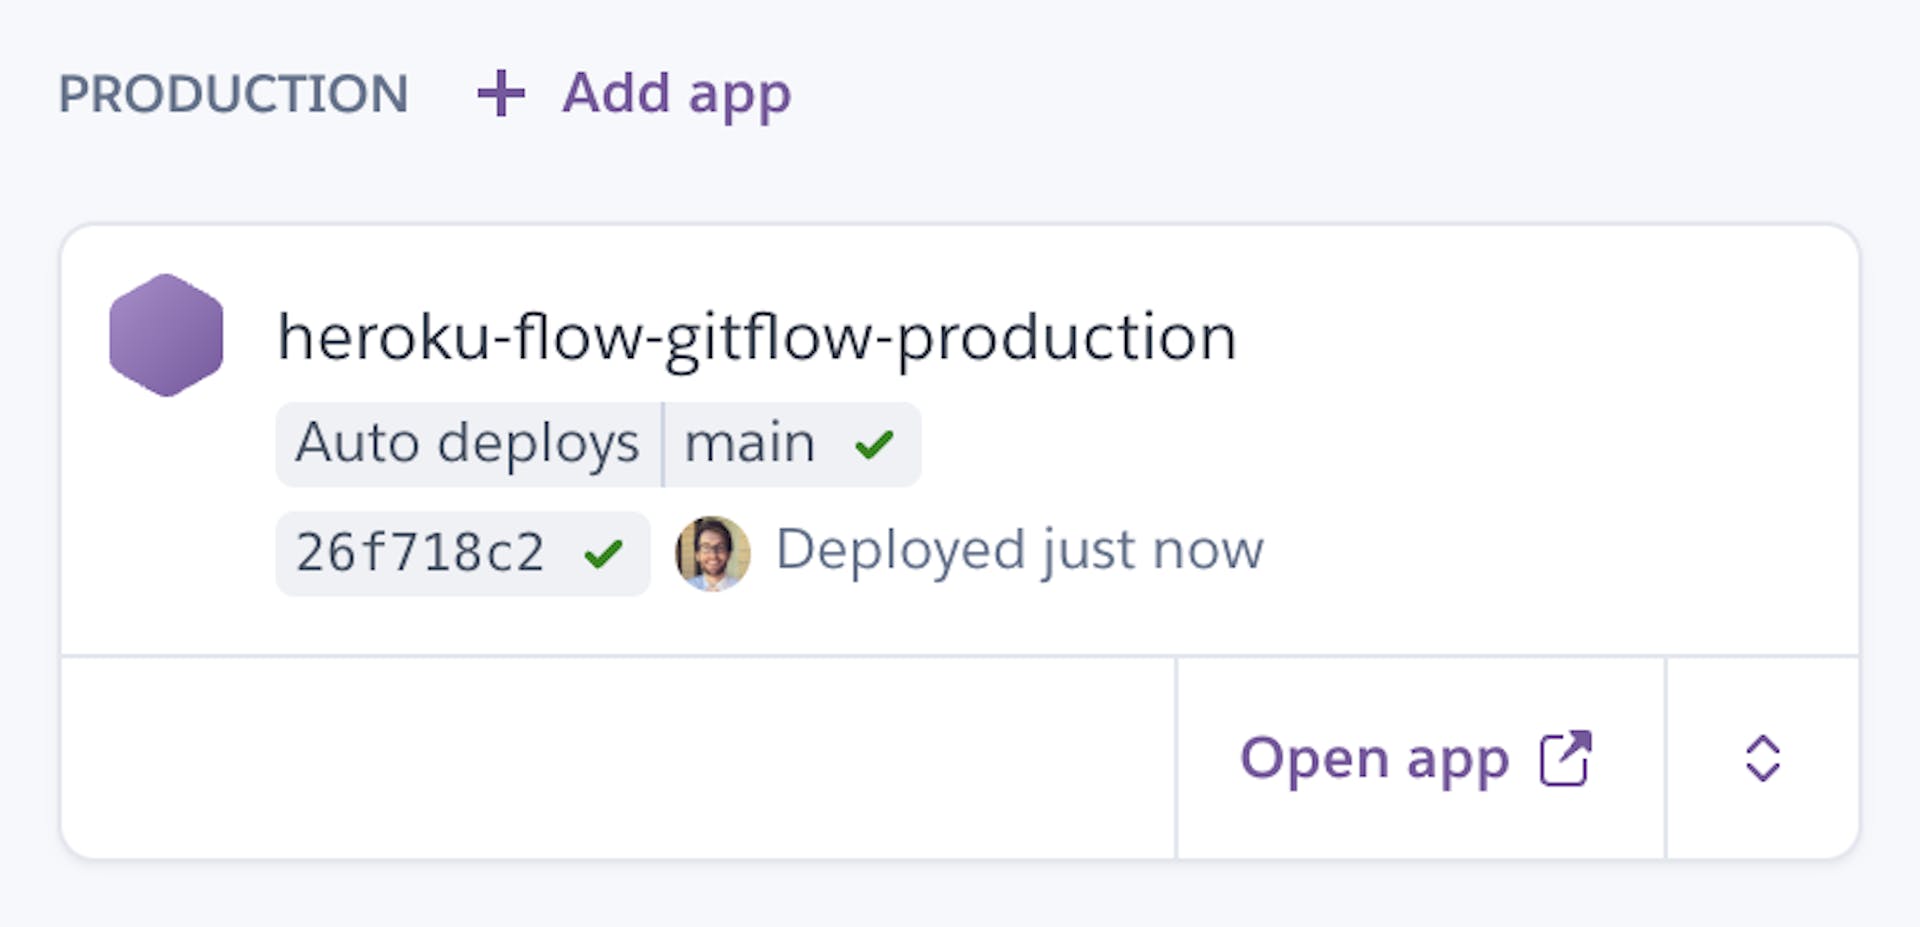 Production app was automatically deployed